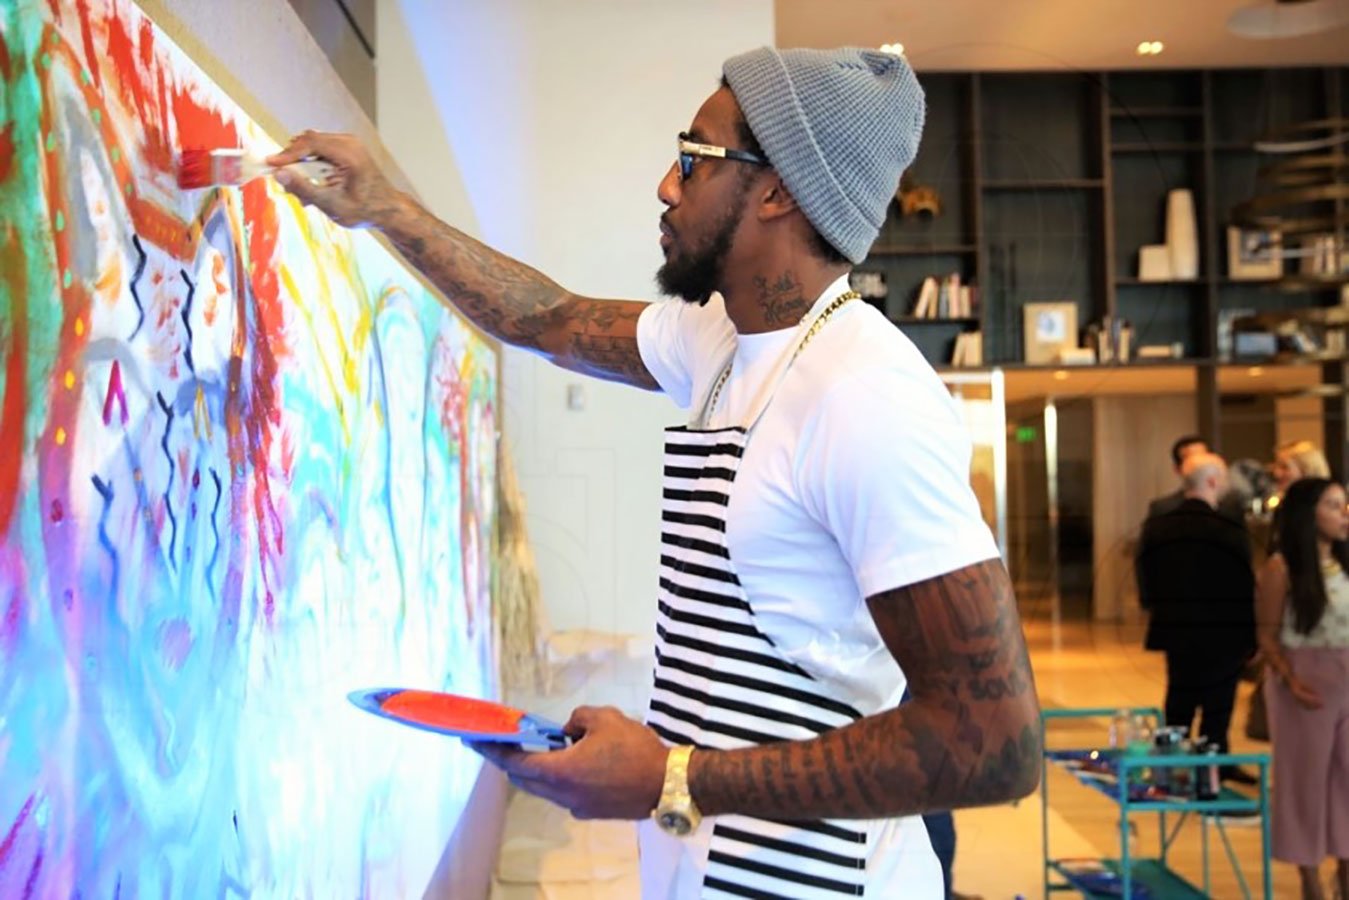 Miami Heat star Amar'e Stoudemire hosted an “In The Paint Series” at The Ritz-Carlton Residences Miami Beach